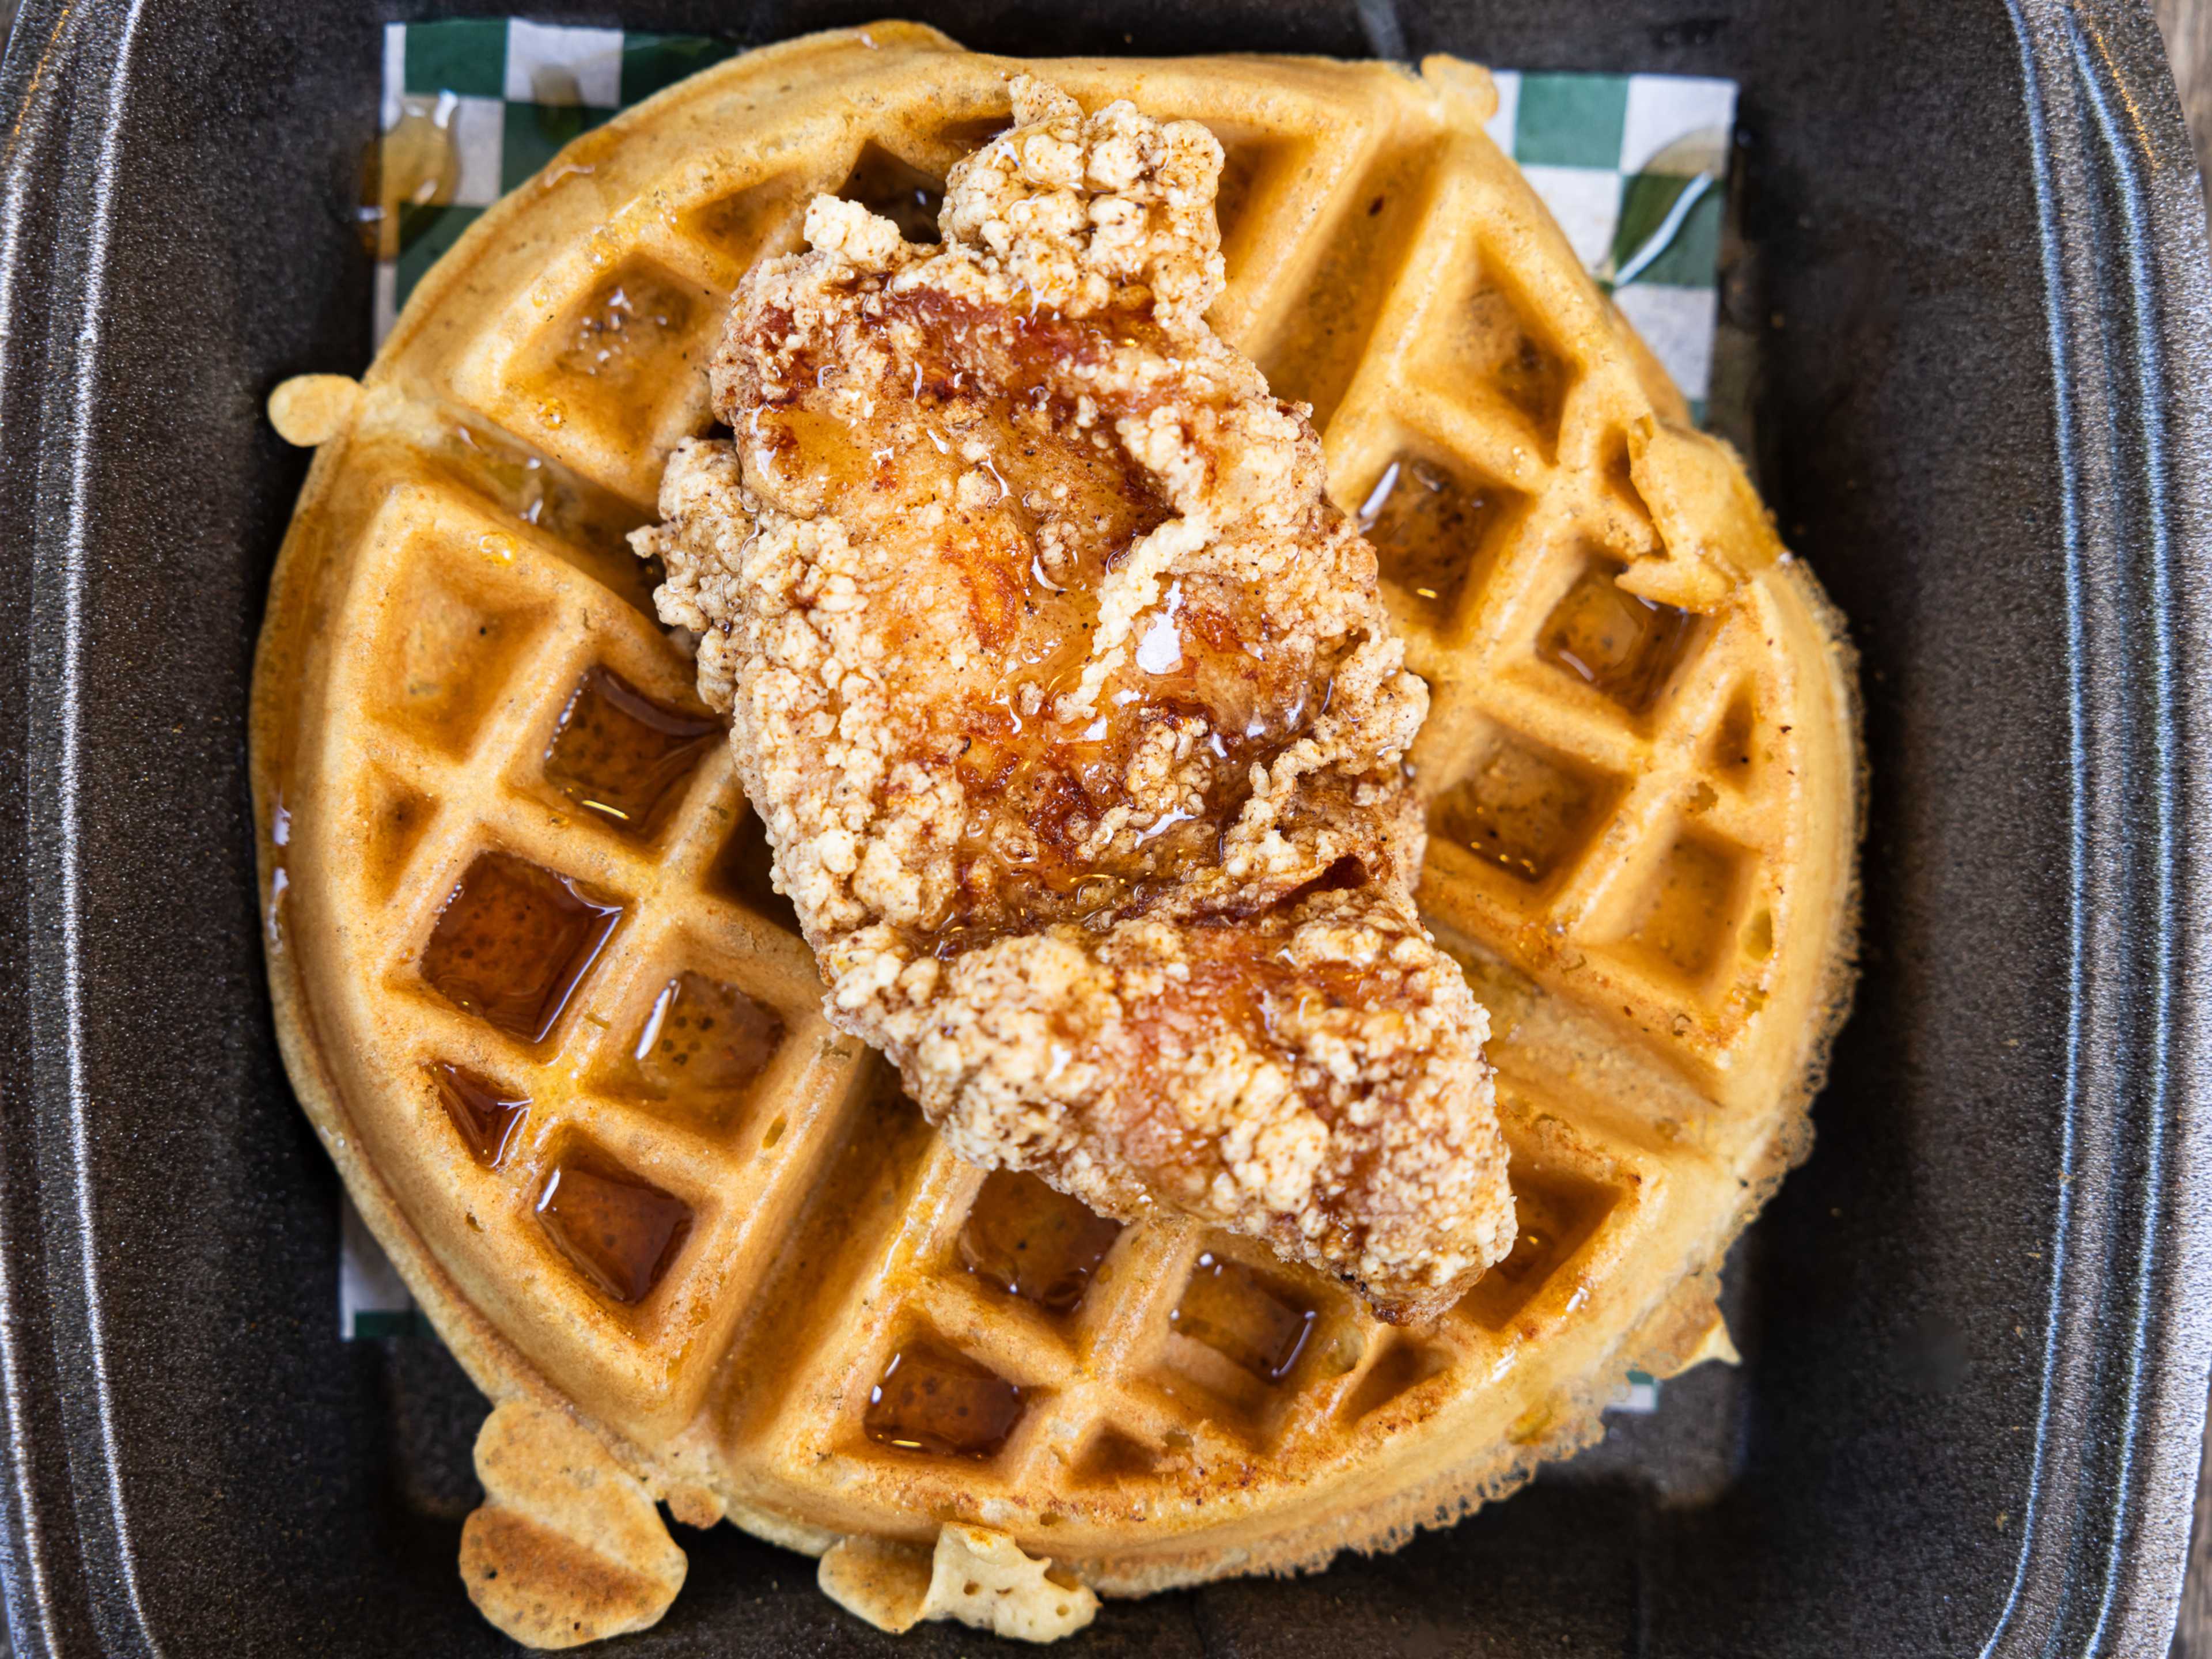 Fried chicken on top of a huge waffle.